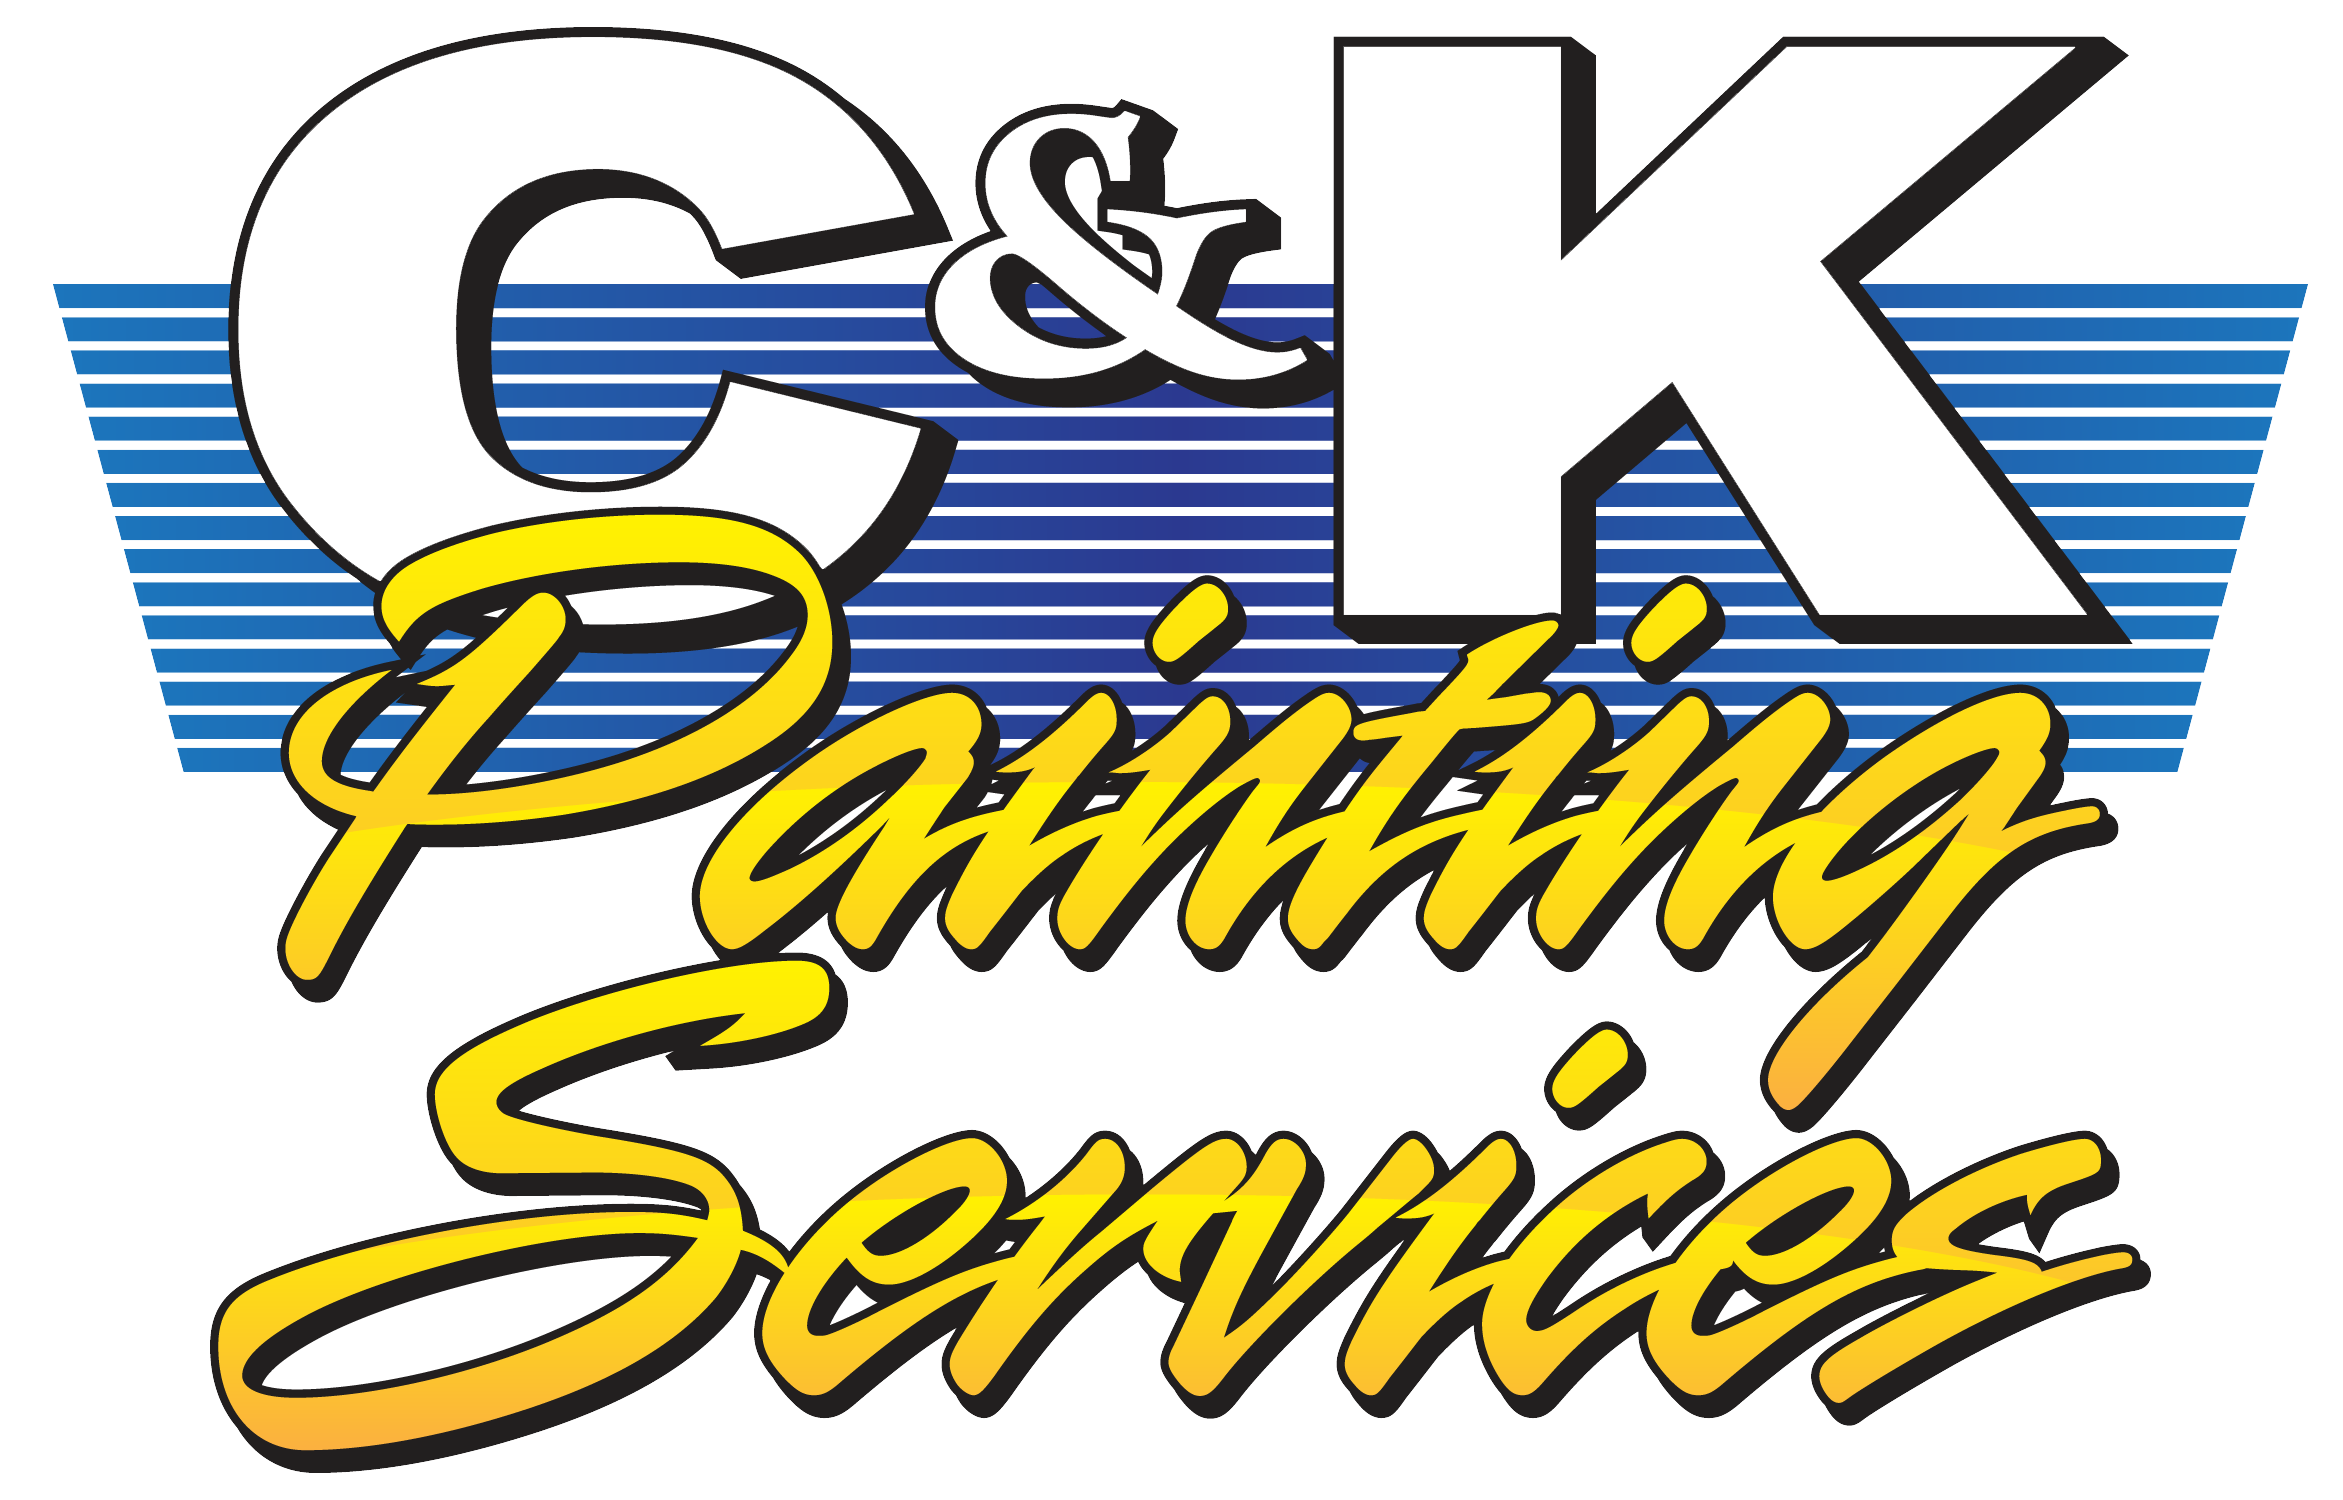 C&K Painting Services